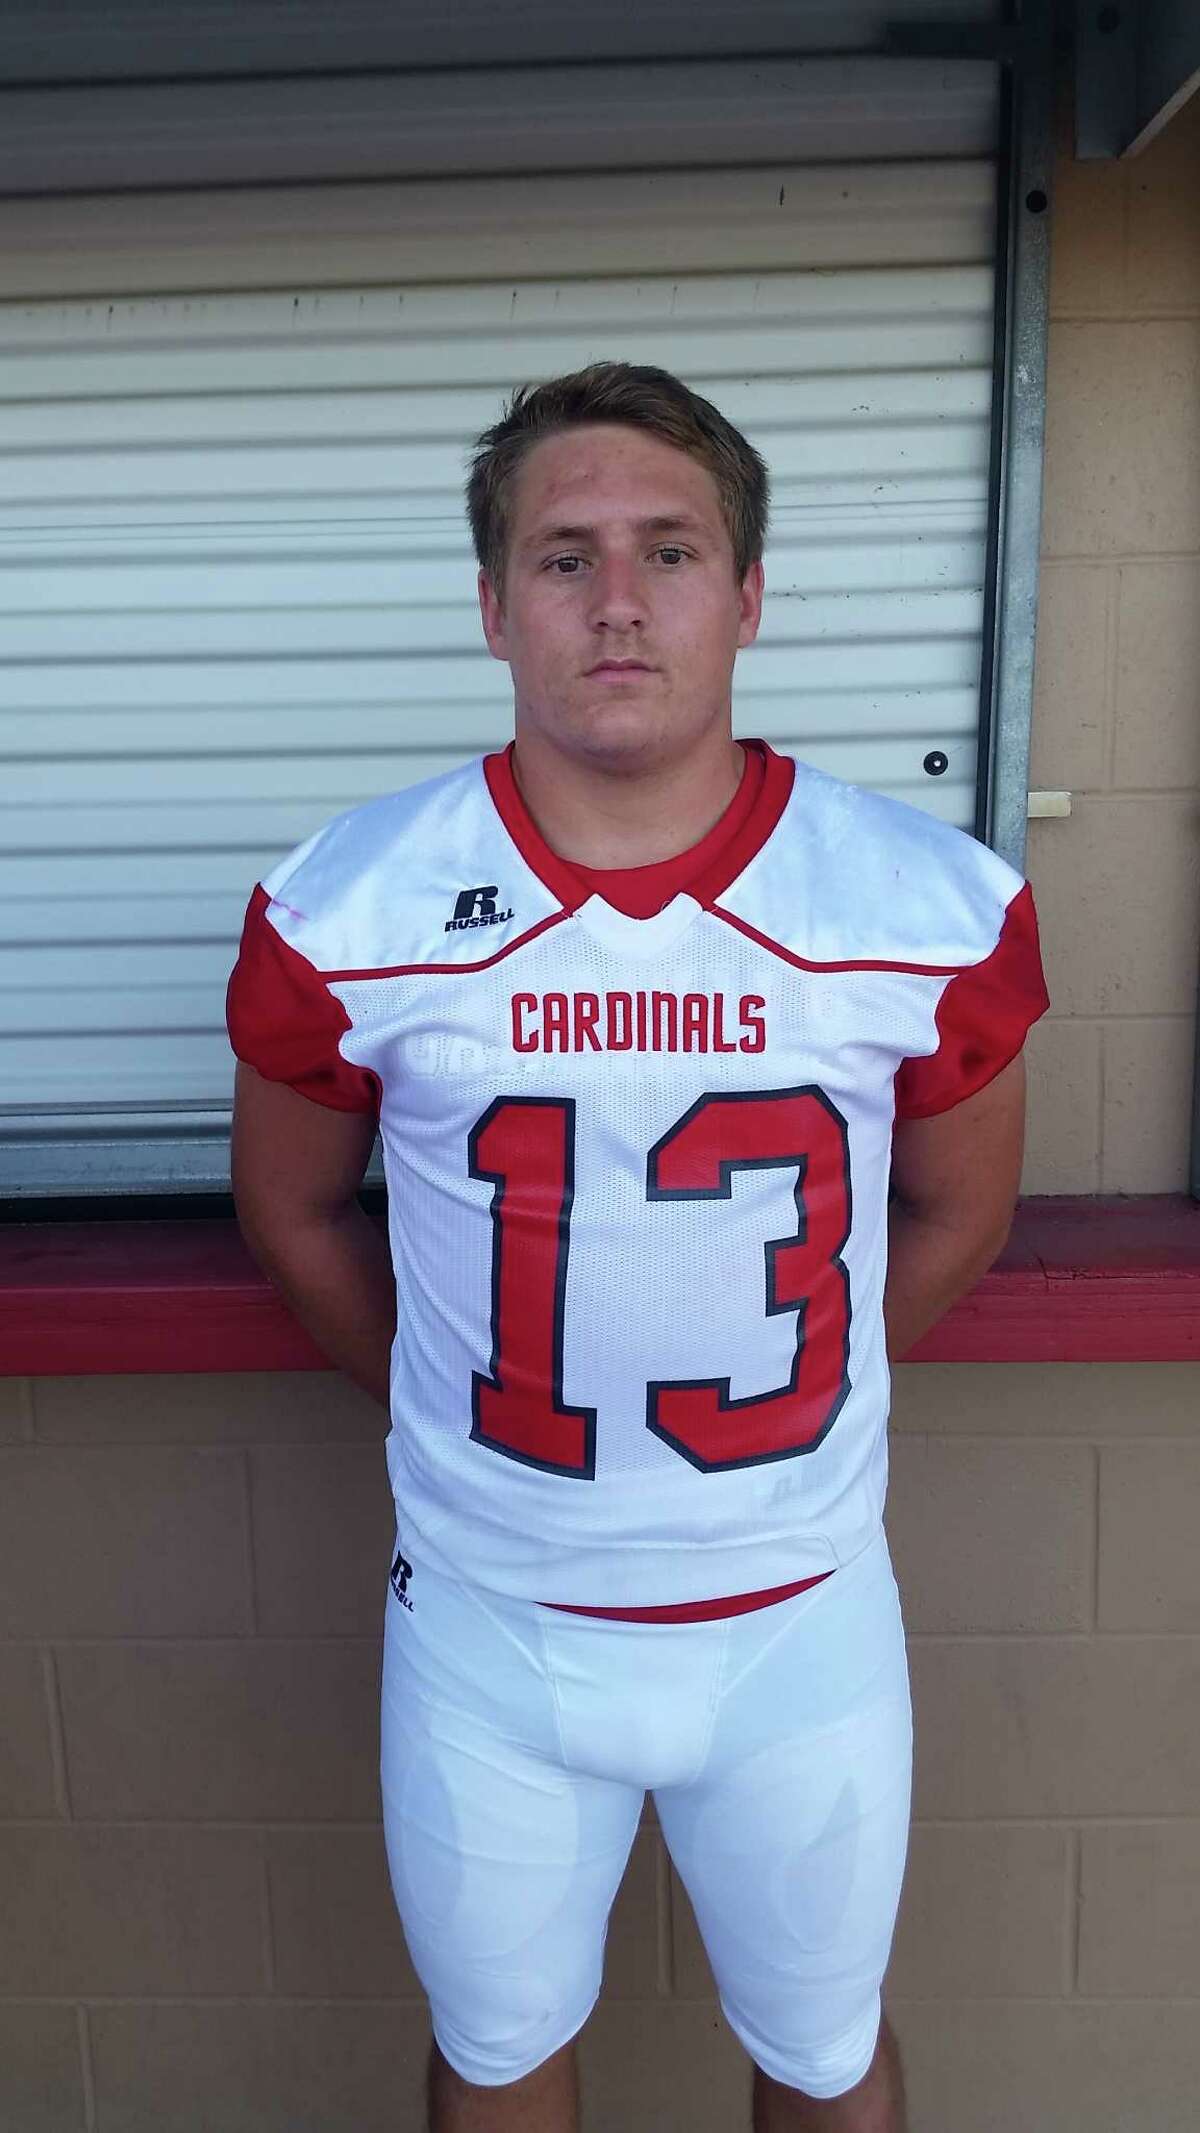 Derick Dearing, Bridge City  Position: RB/LB  Height: 5-9  Weight: 185 pounds  Grade: Senior  A player coach Dwayne DuBois says has "great football sense and great football skills" and was the Cardinals' leading tackler.